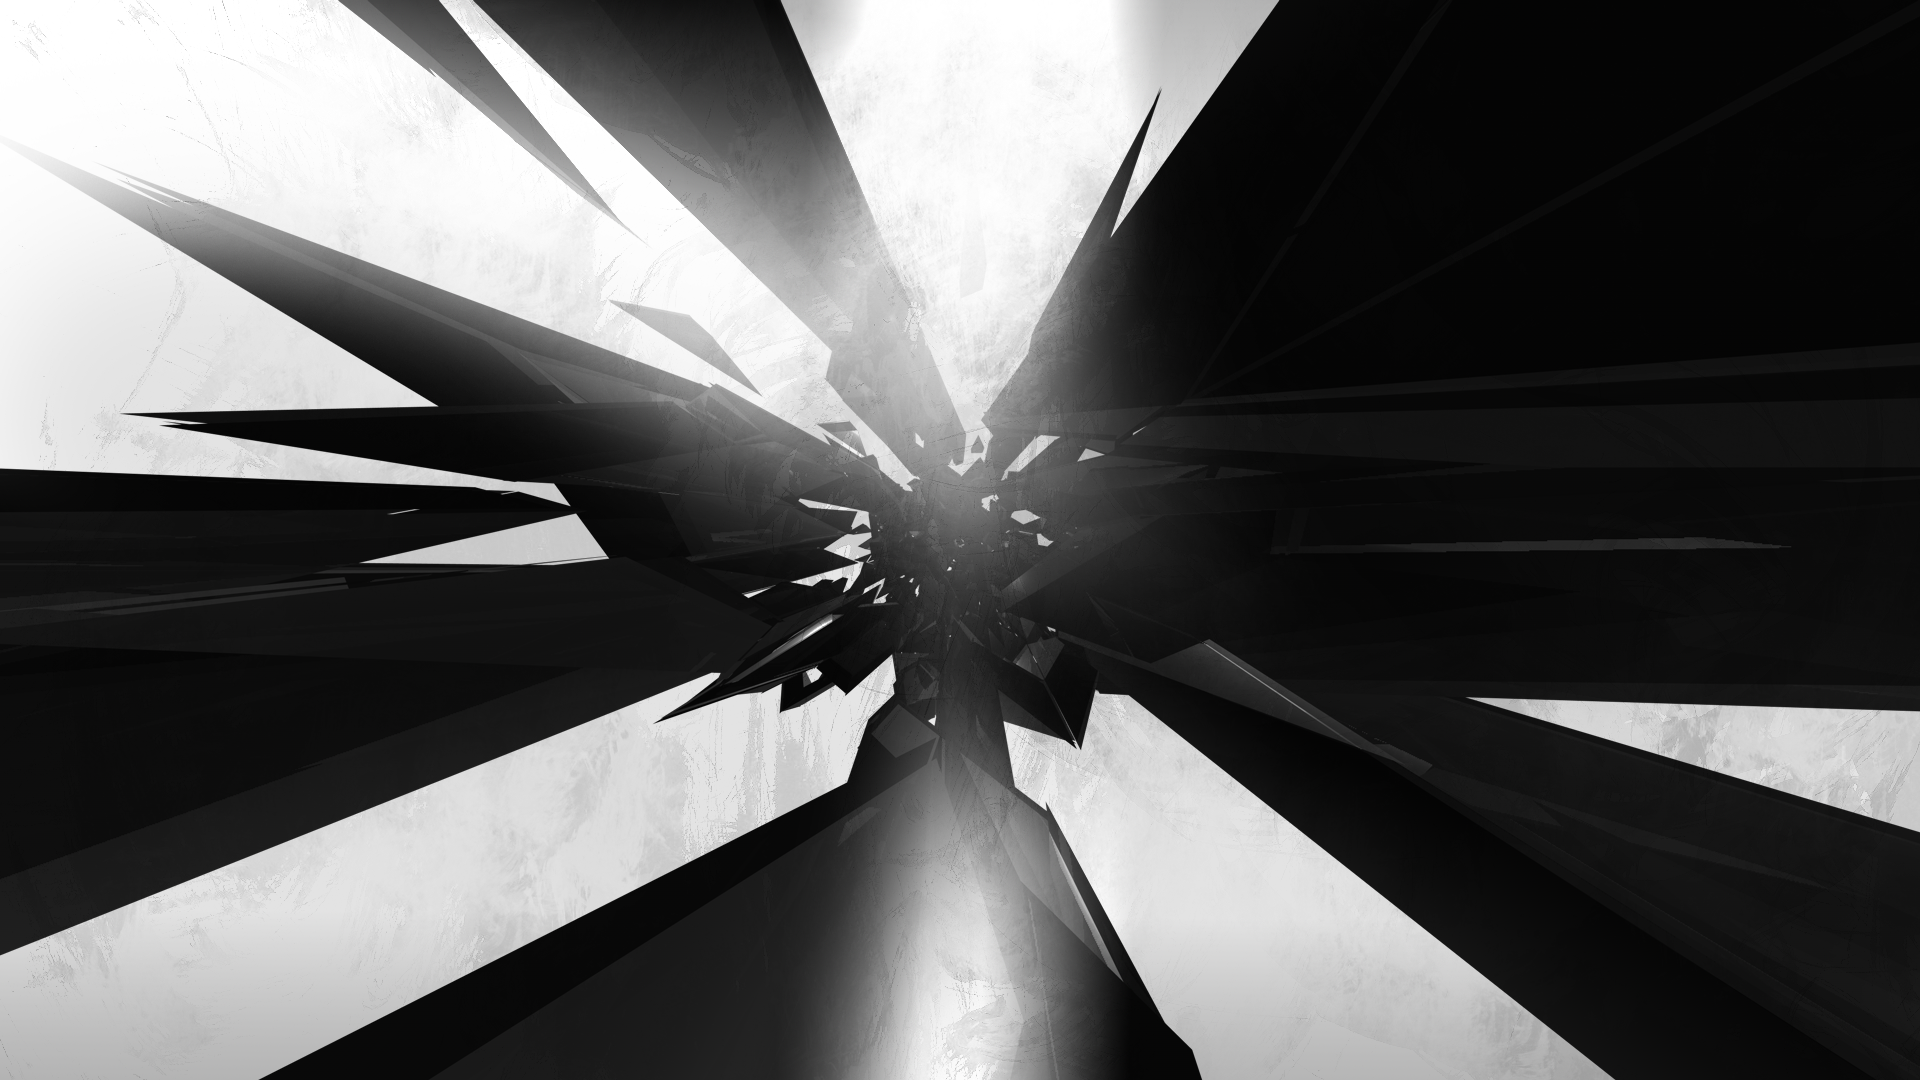 Another Black And White Abstract Wallpaper By